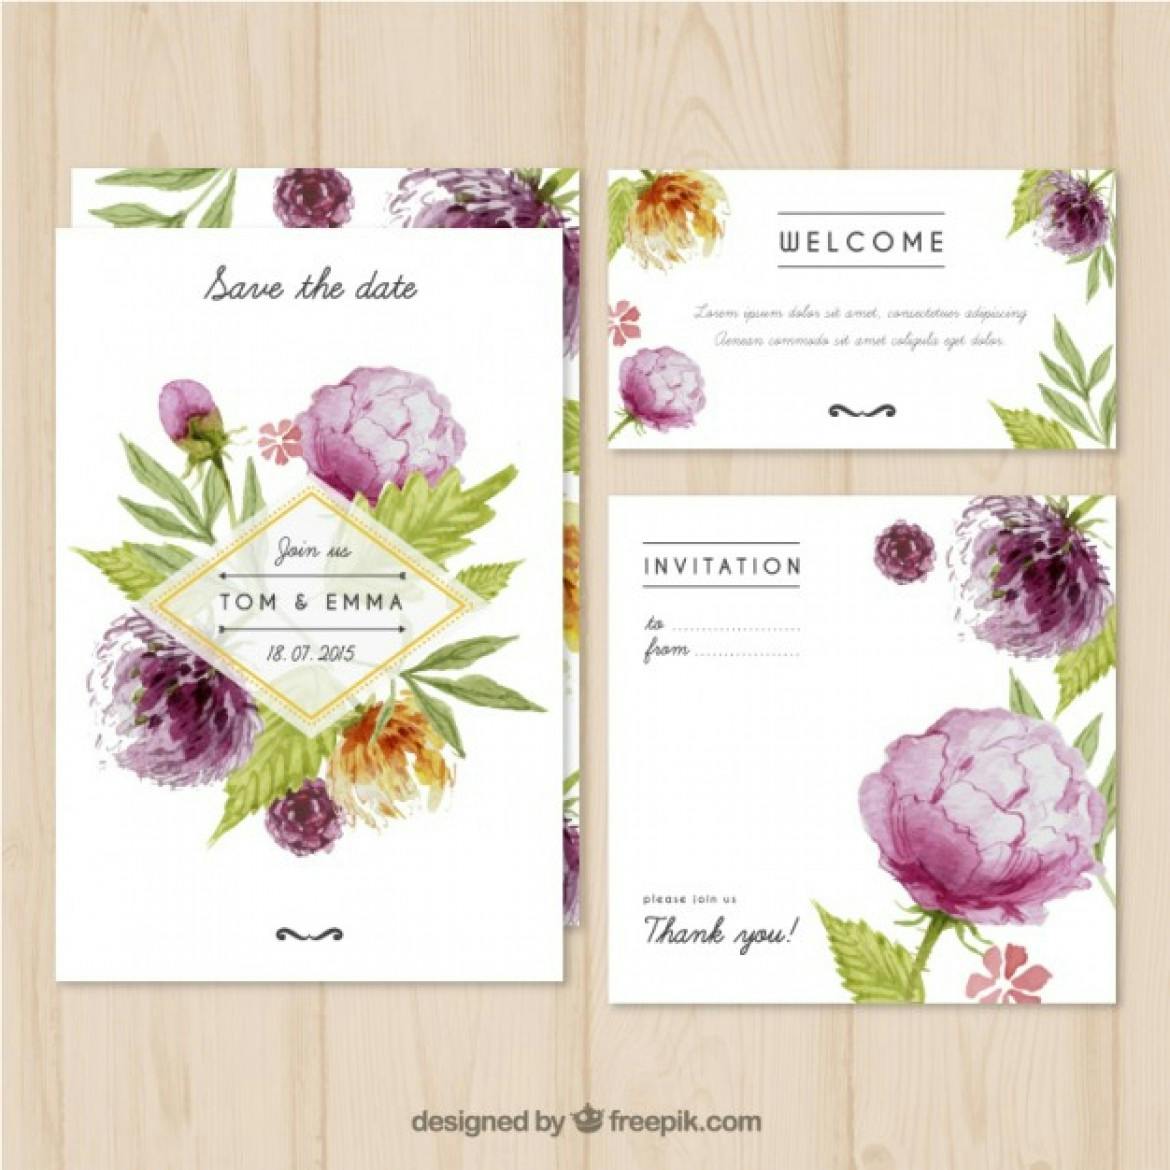 wpid-watercolor-wedding-invitation-with-flowers_23-2147514888-1170x1170